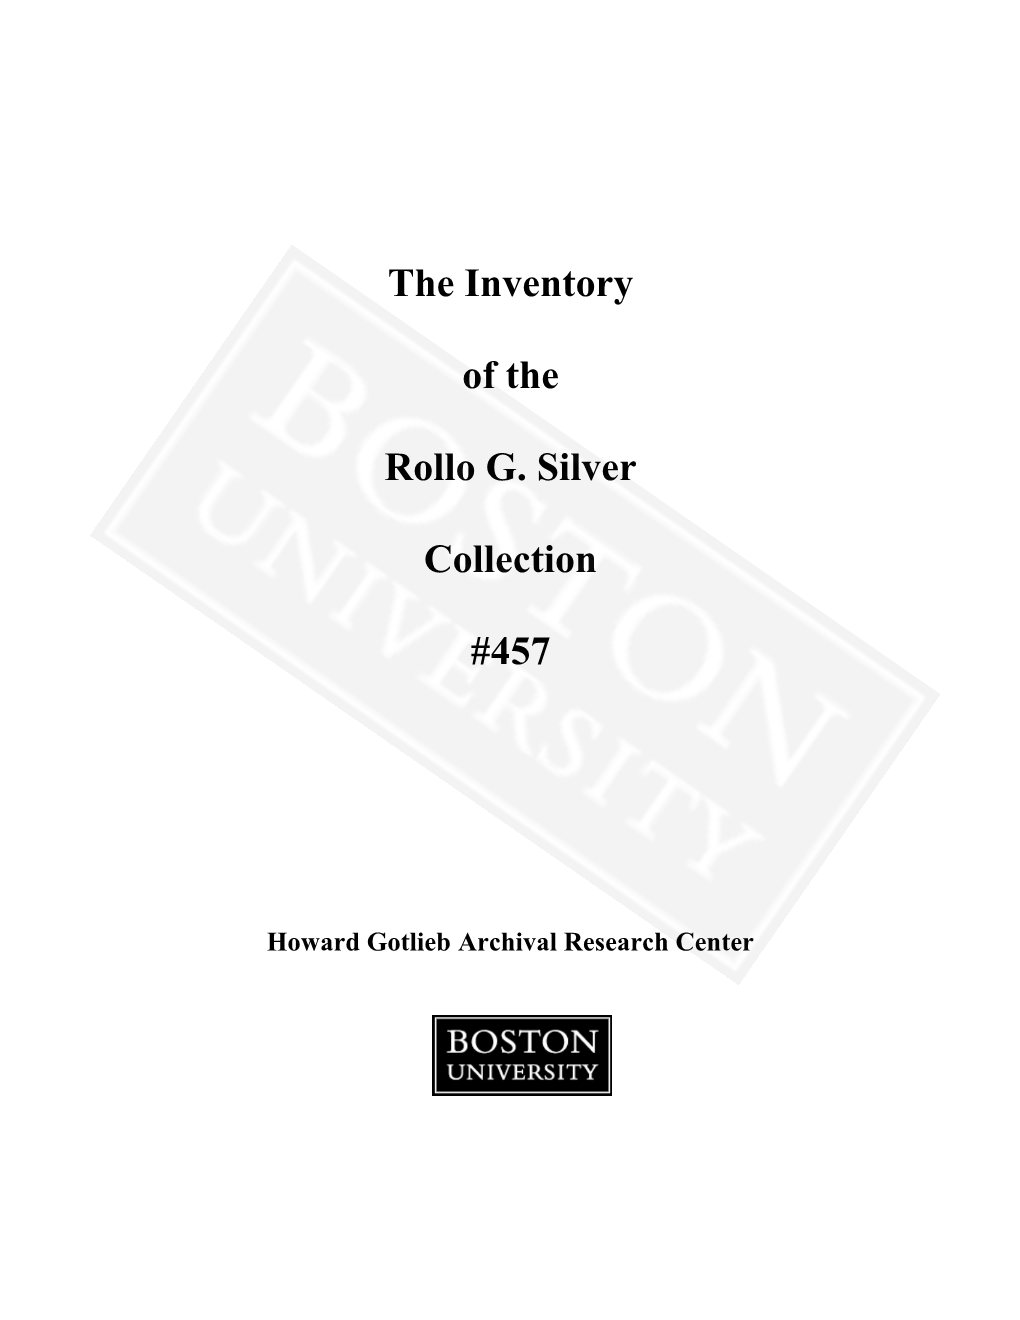 The Inventory of the Rollo G. Silver Collection #457